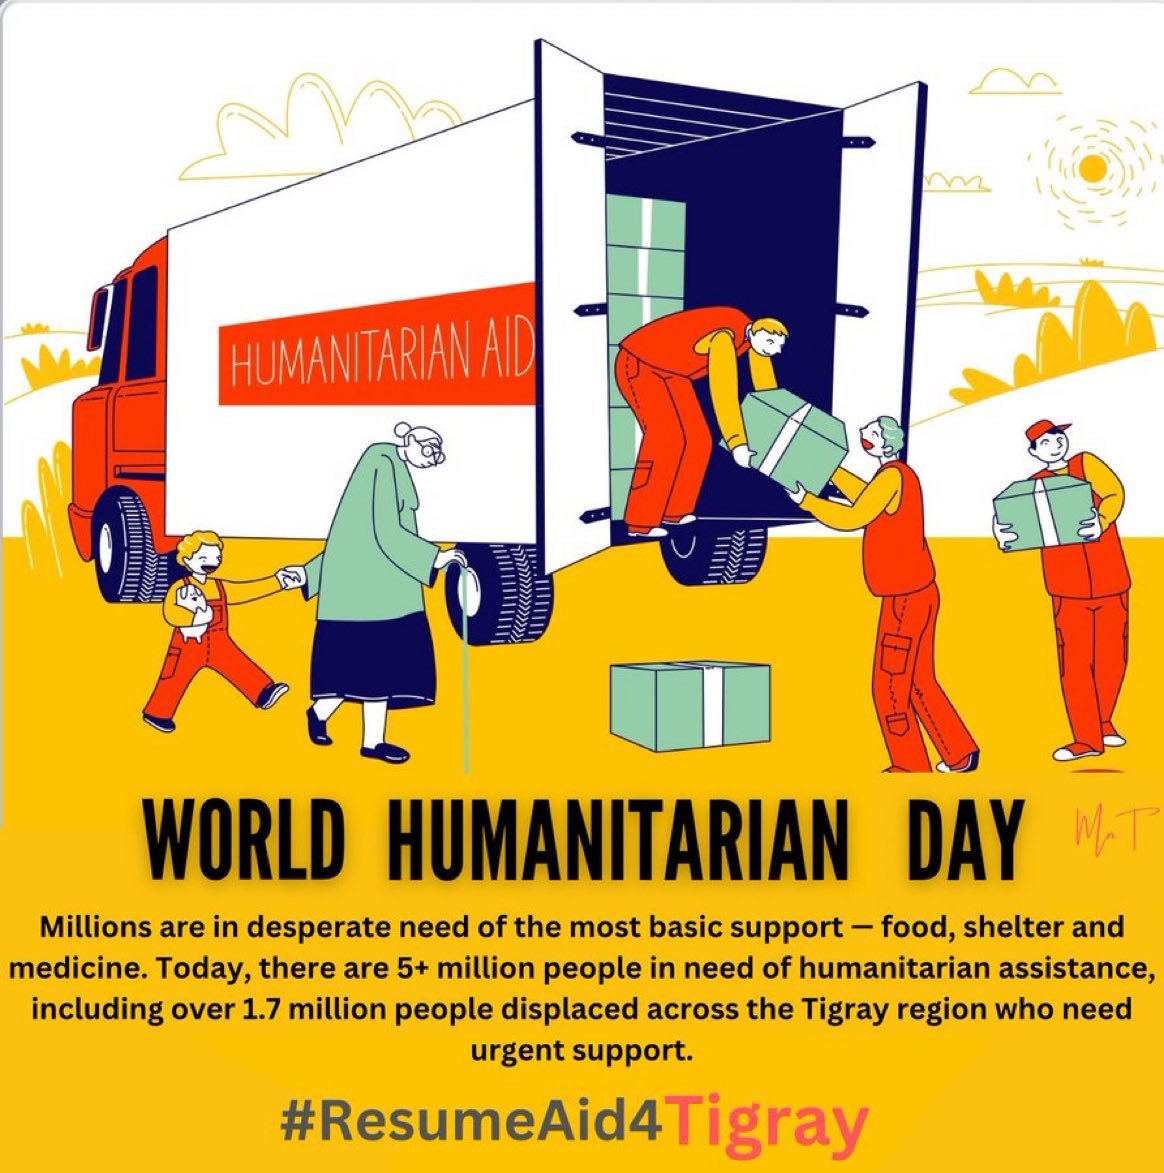 A full-scale humanitarian crisis is unfolding as the @PowerUSAID continues suspending humanitarian aid to #Tigray .On this #WHD2023 millions continue to suffer in Tigray. Please ACT #ResumeAid4Tigray #UpholdThePretoriaAgreement @KenyaMissionUN @WFP @USAID @MikeHammerUSA @Shewit83